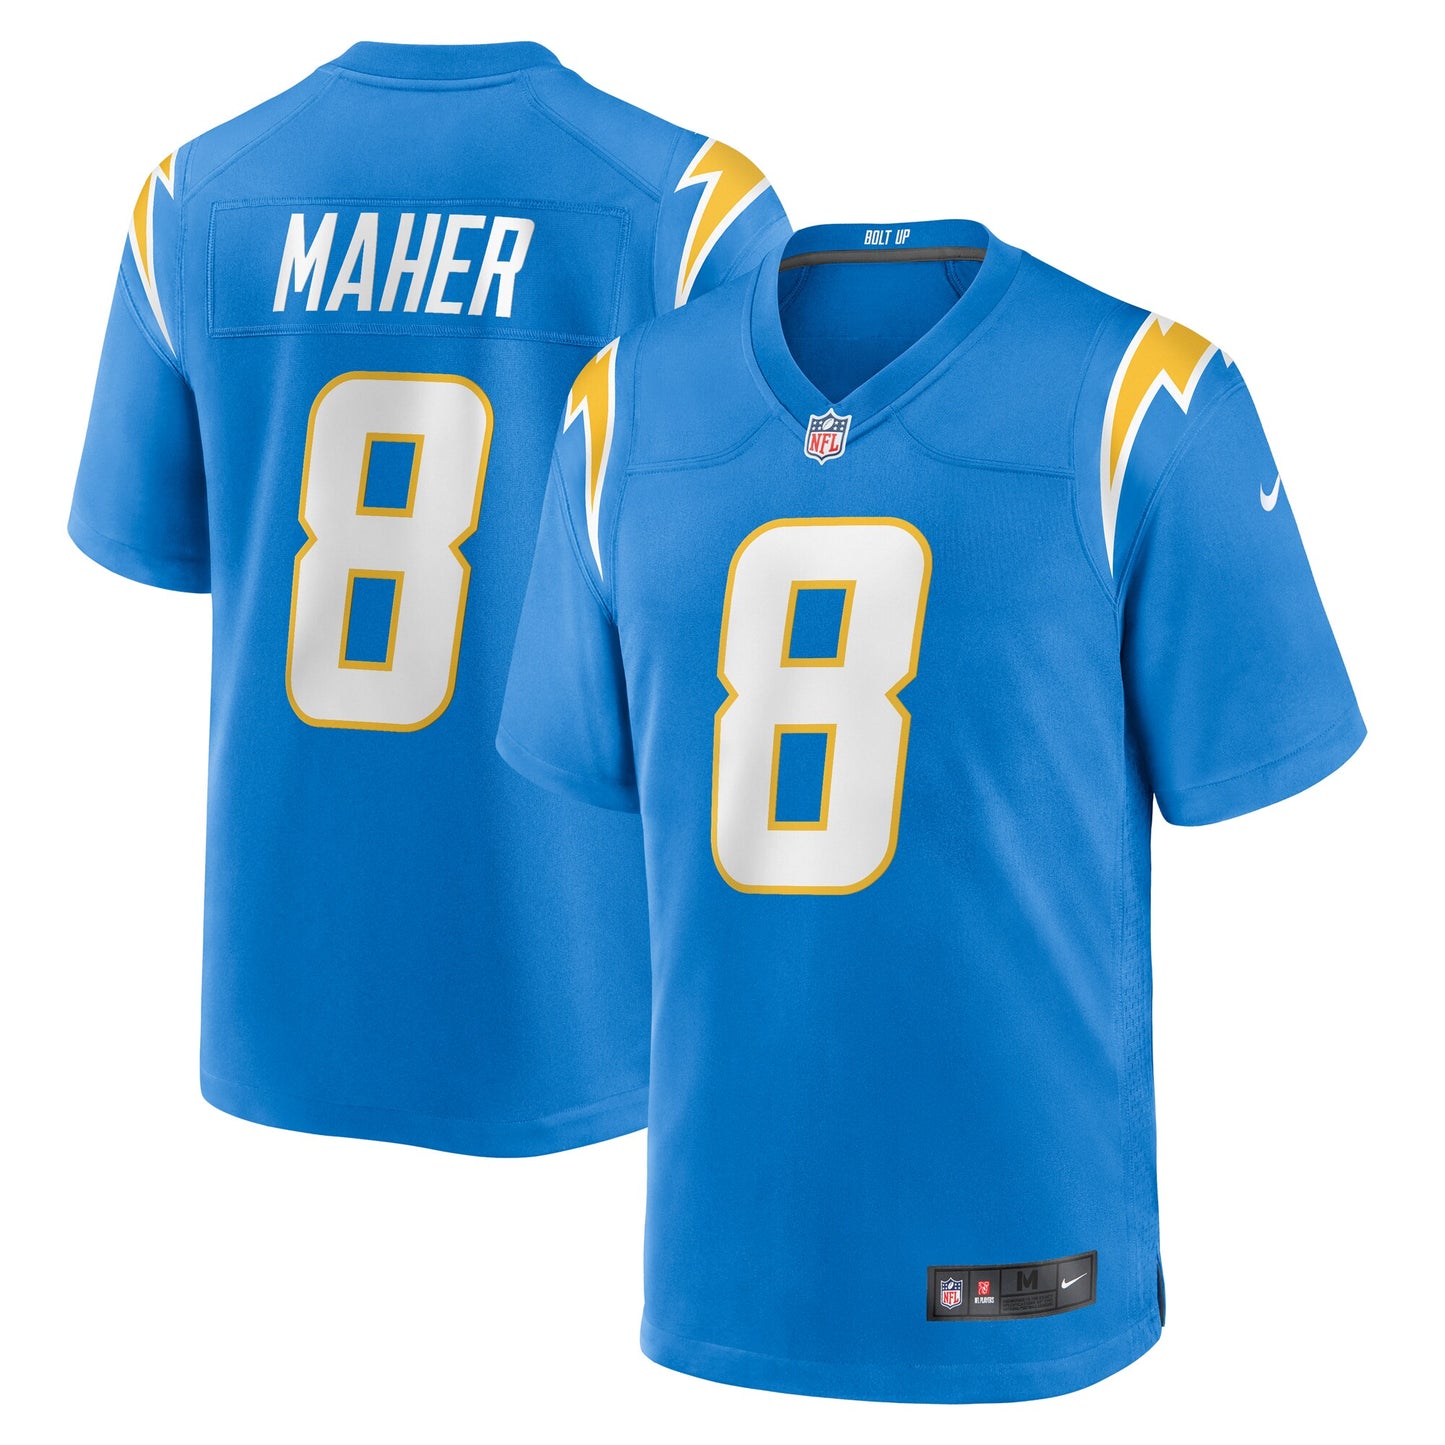 Brett Maher Los Angeles Chargers Nike Team Game Jersey -  Powder Blue